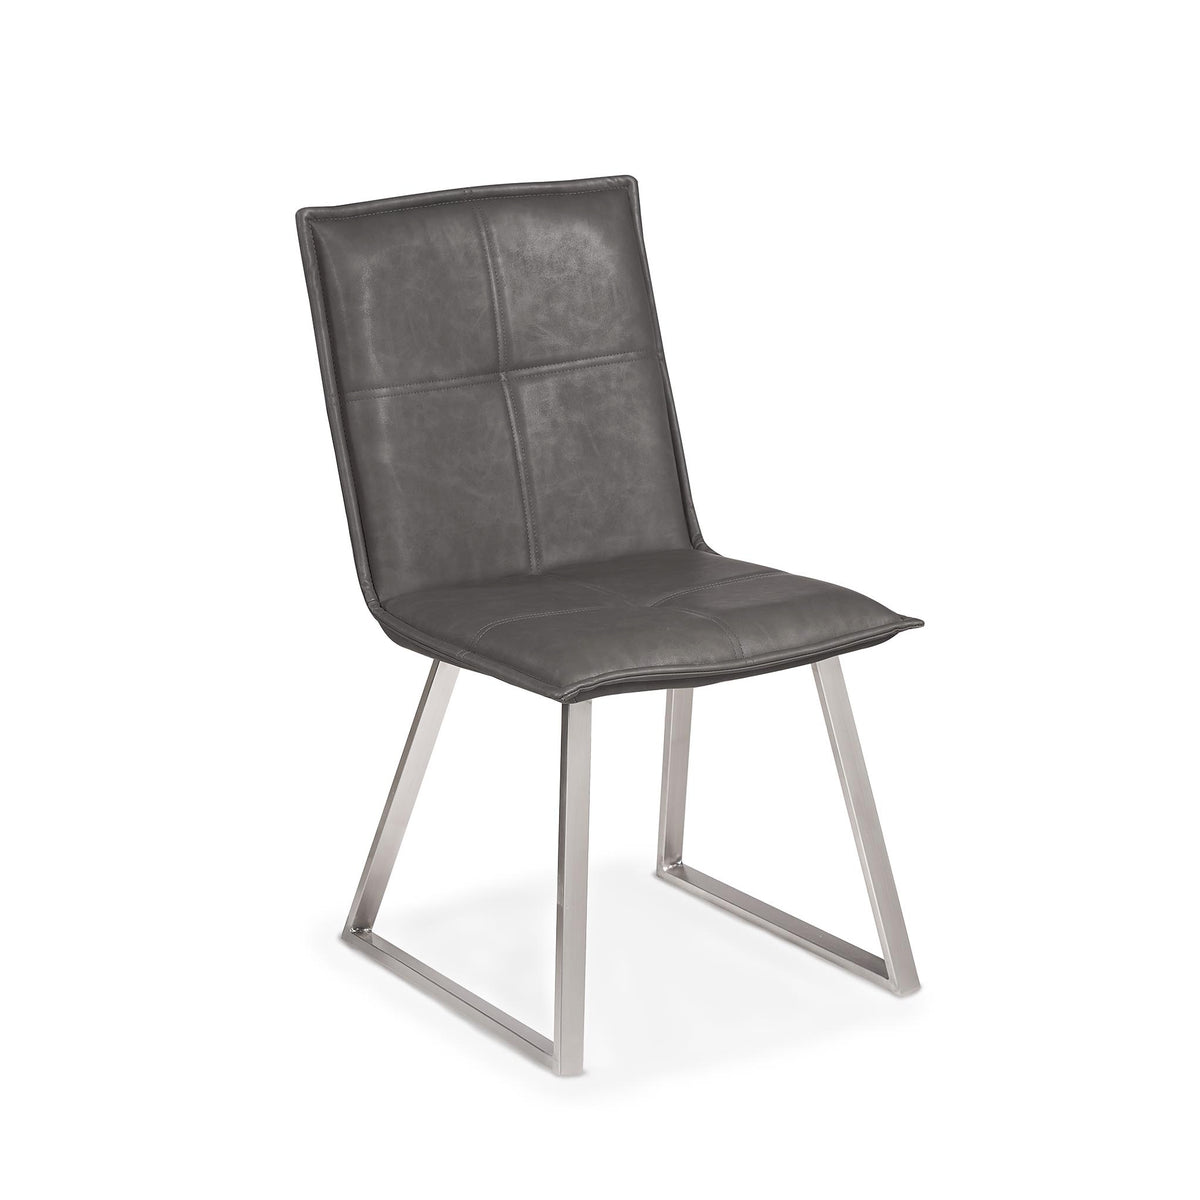 Lucca Dining Chair Stainless Steel by Roseland Funiture